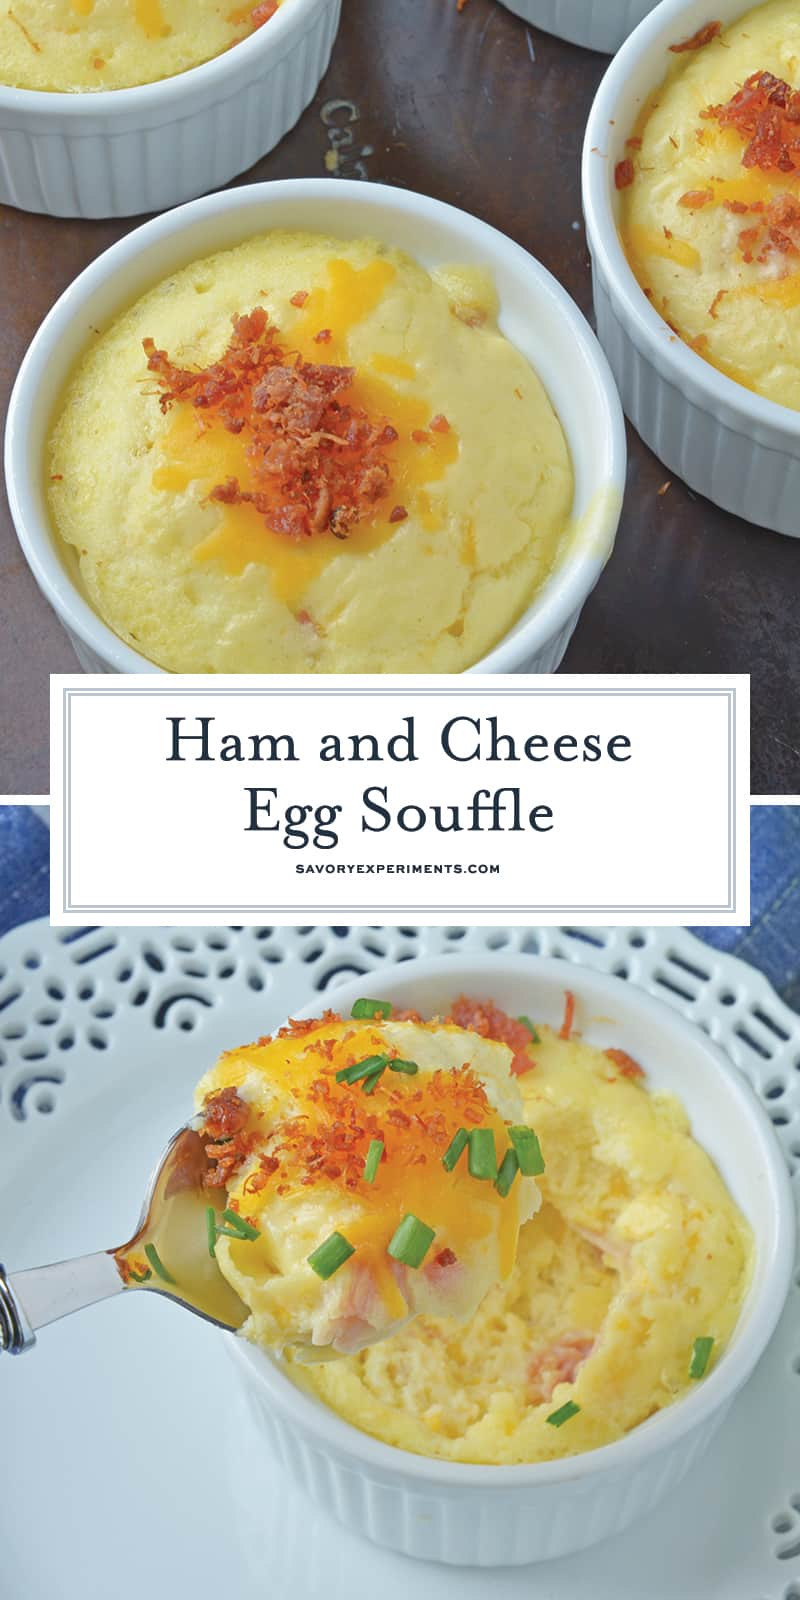 Egg Souffle Recipes Breakfast
 Ham and Cheese Egg Soufflé A Delicious Soufflé Recipe